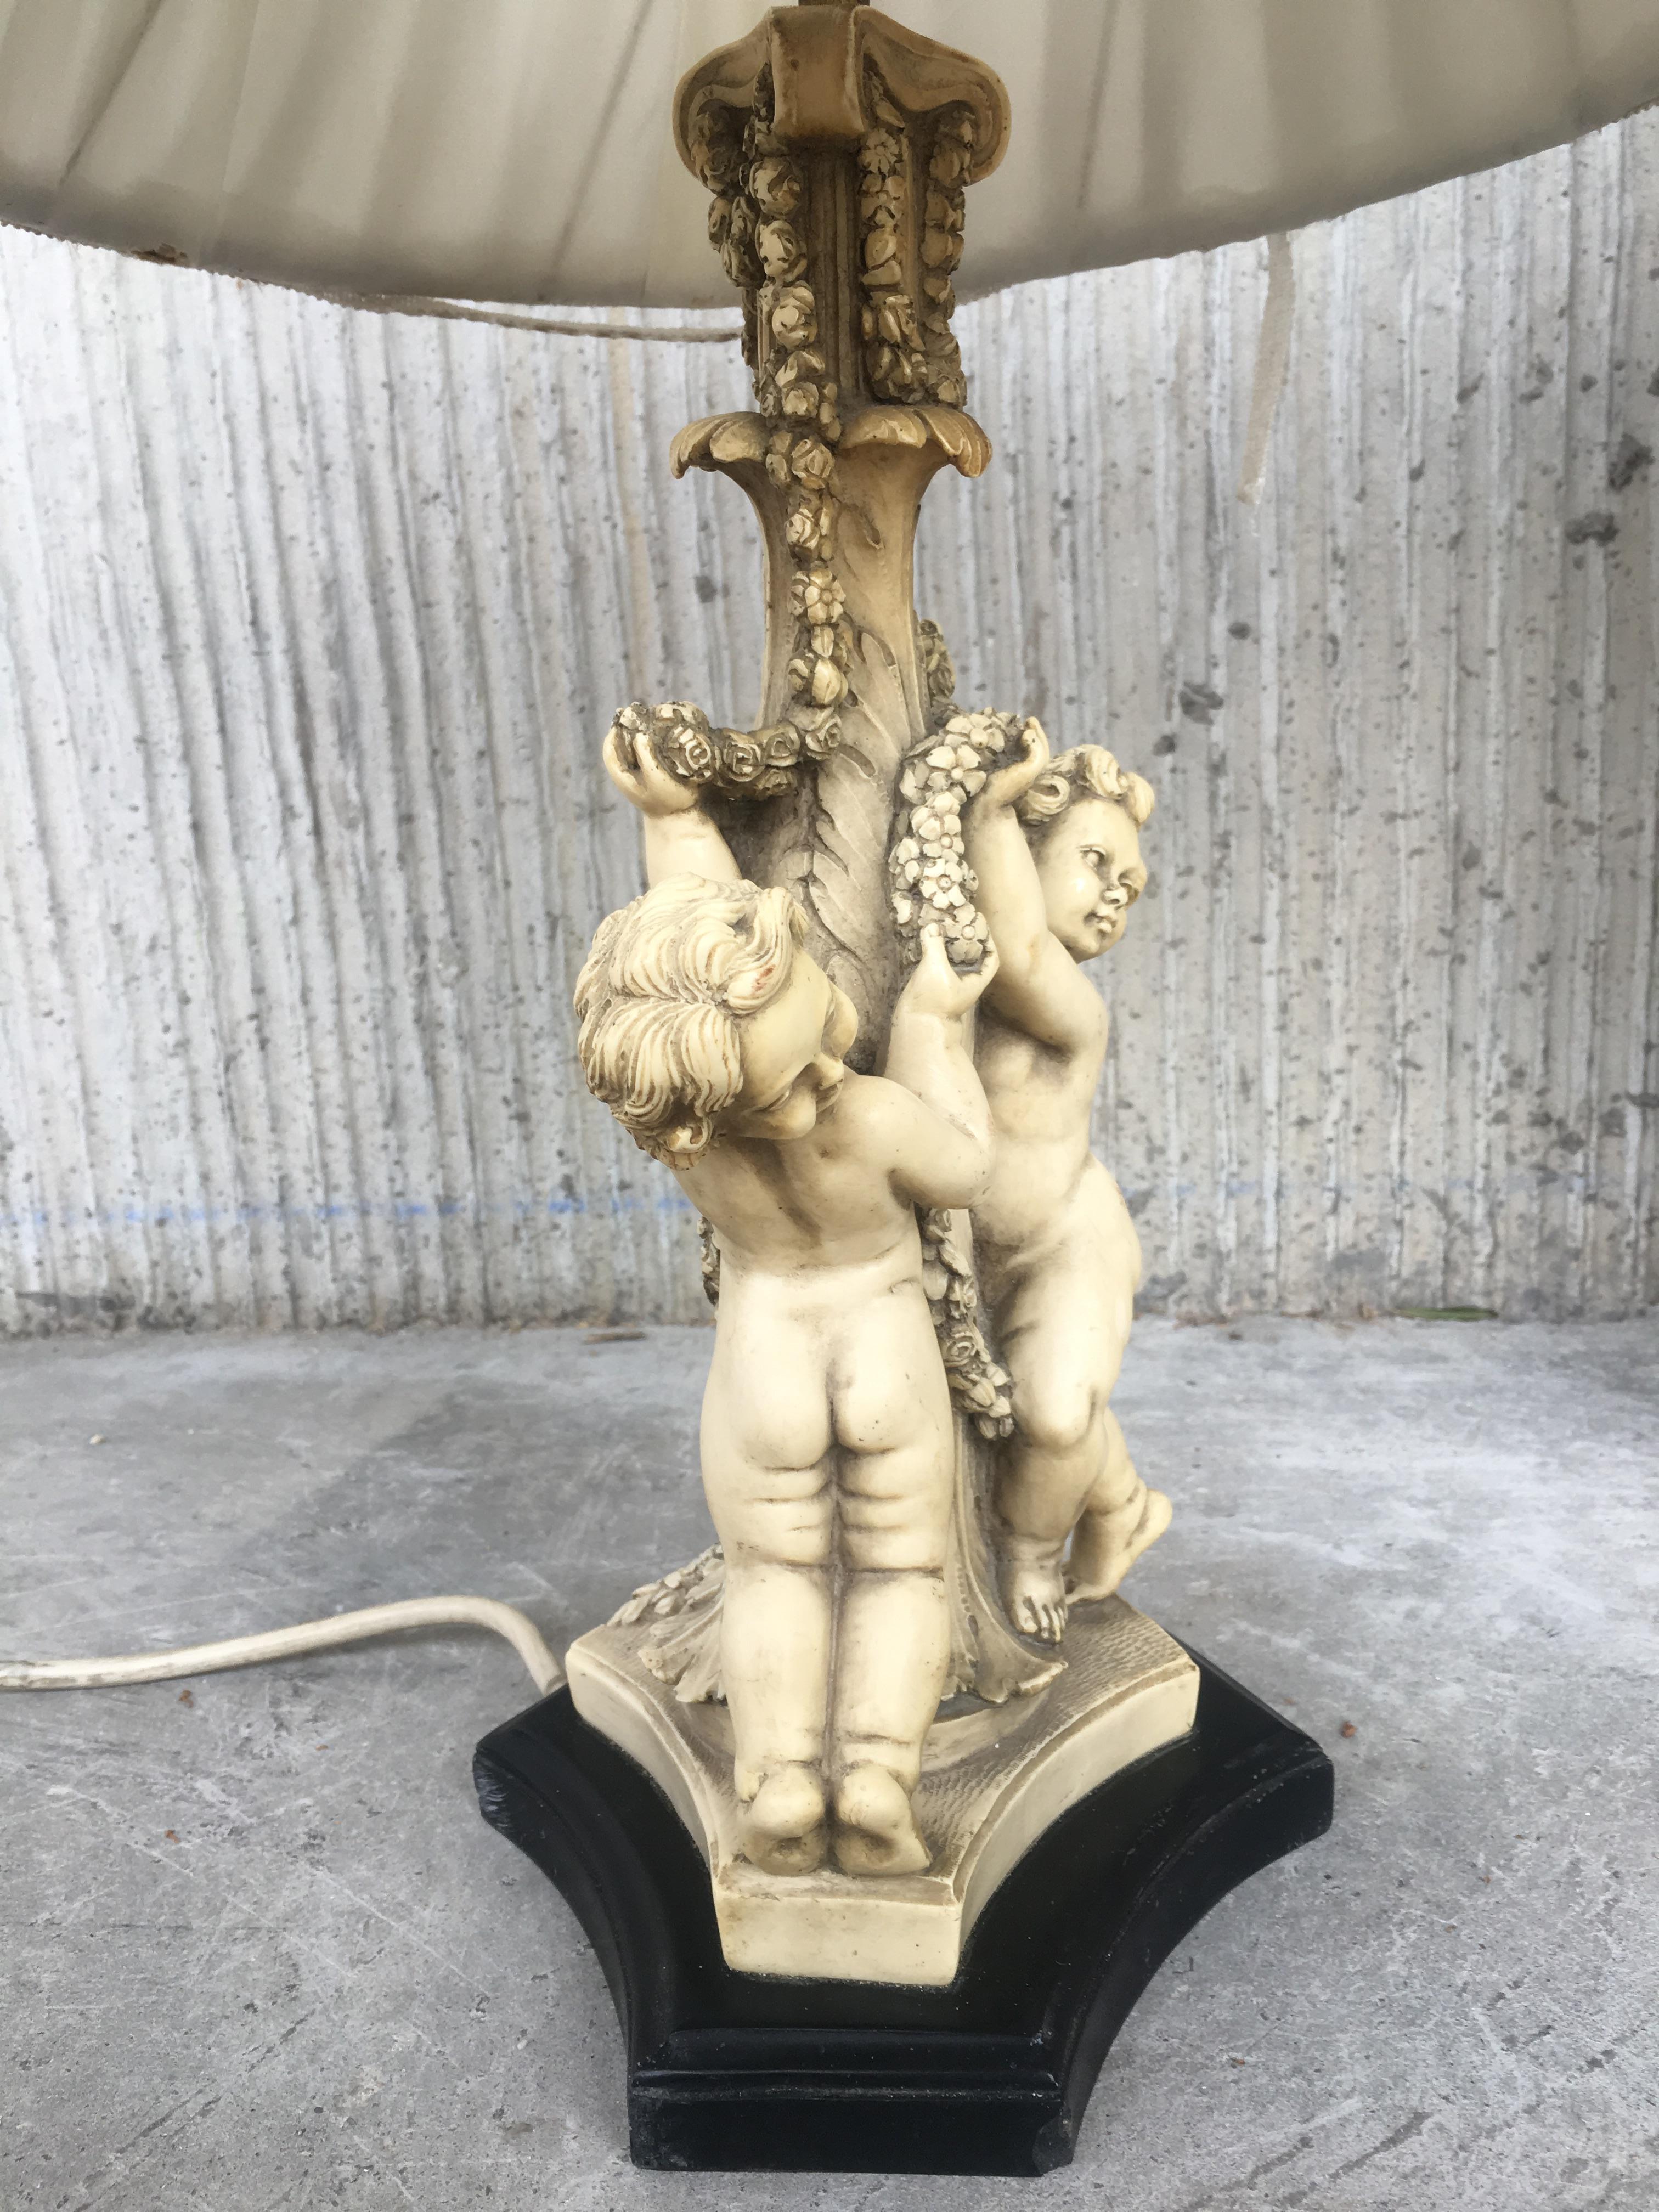 Italian 20th Century Pair of White Resin Cherub Lamps on Wooden Bases by G. Ruggeri For Sale